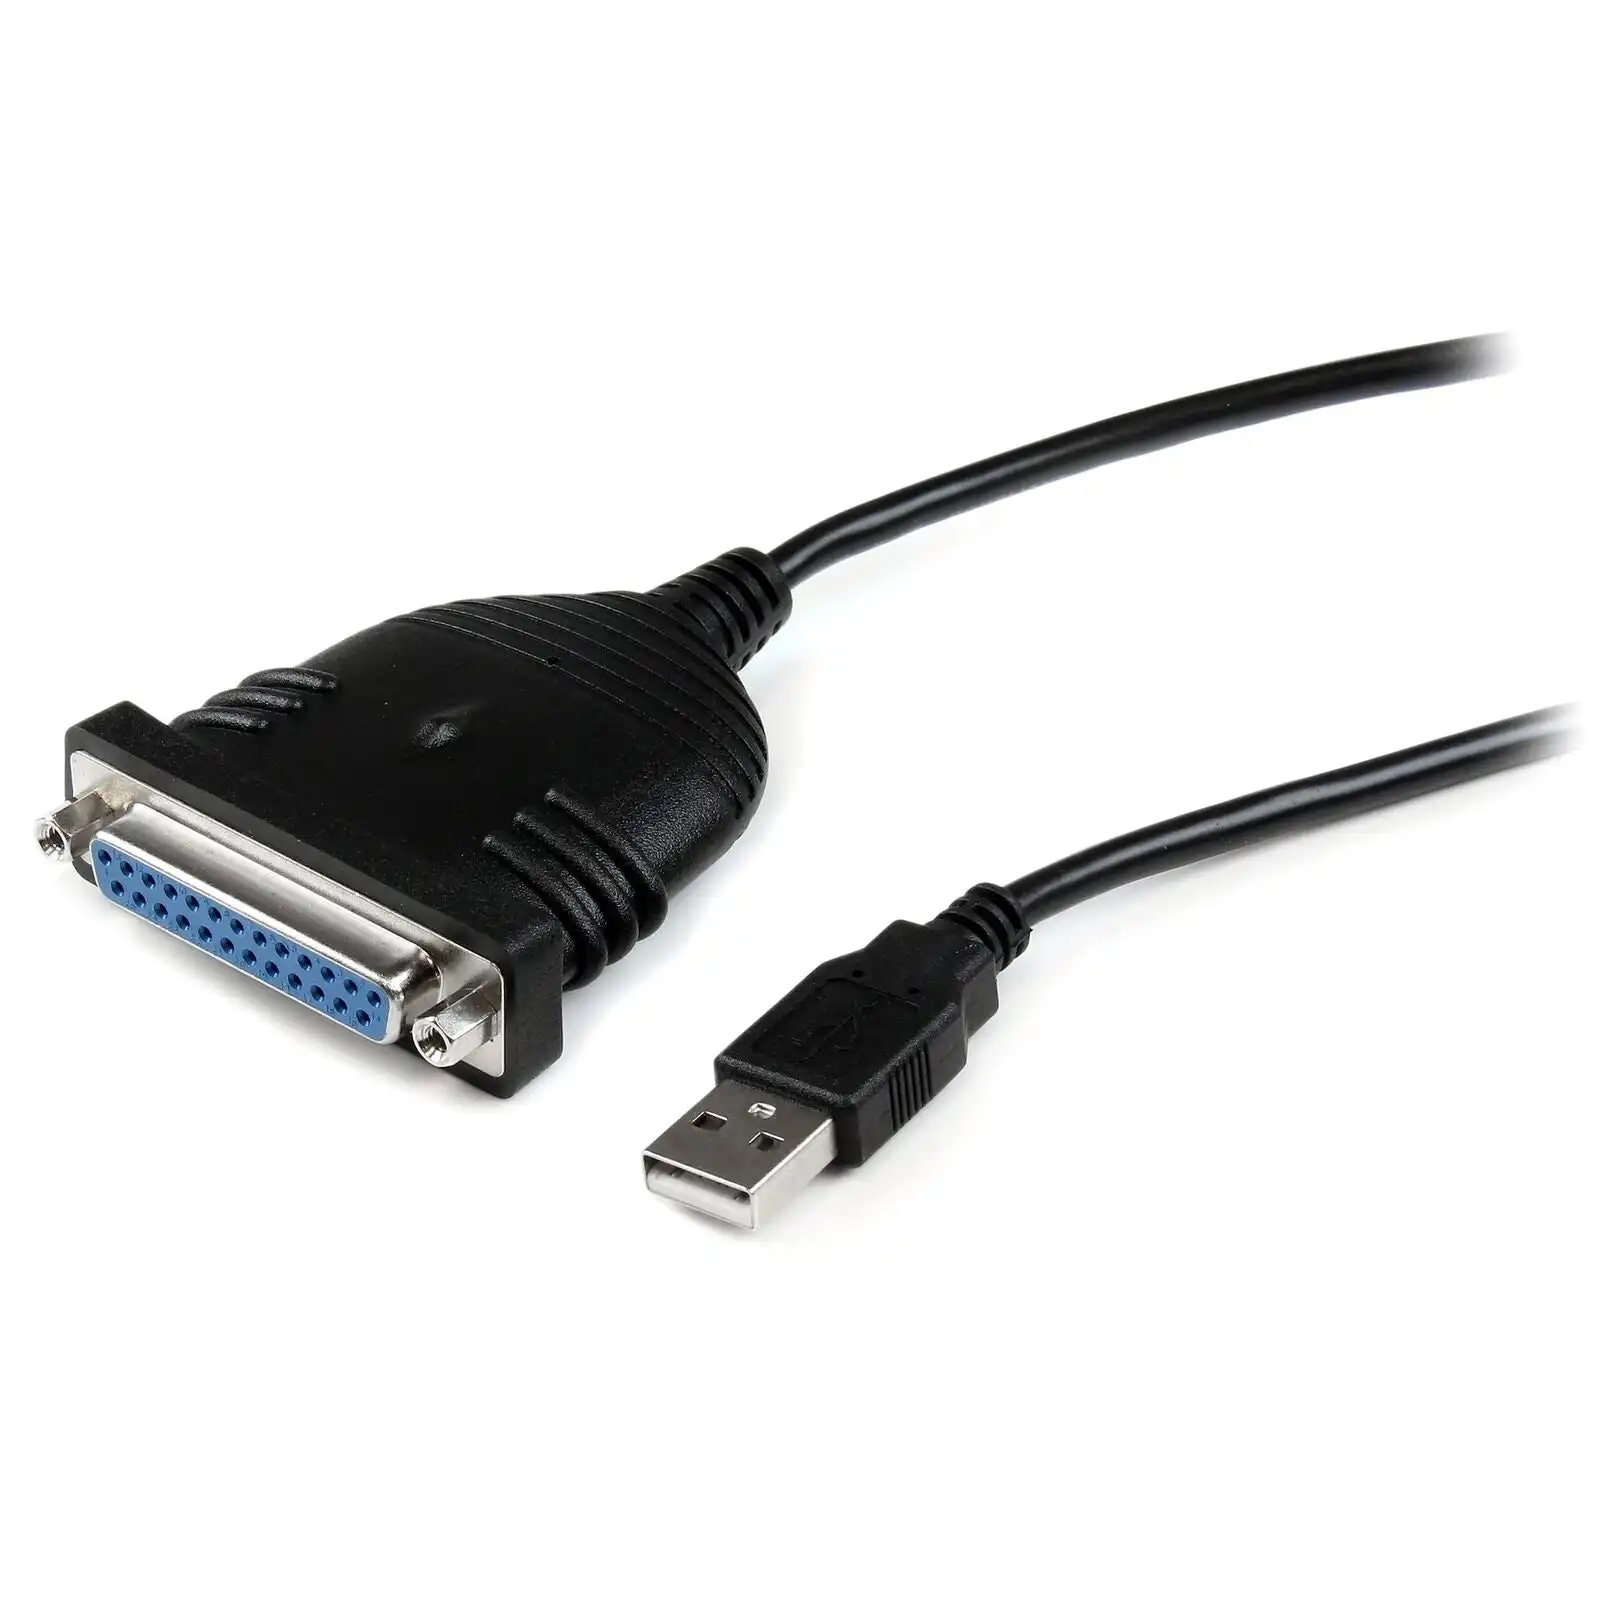 Star Tech 6ft USB to DB25 Parallel Printer Adapter Cable Cord for PC/Computer